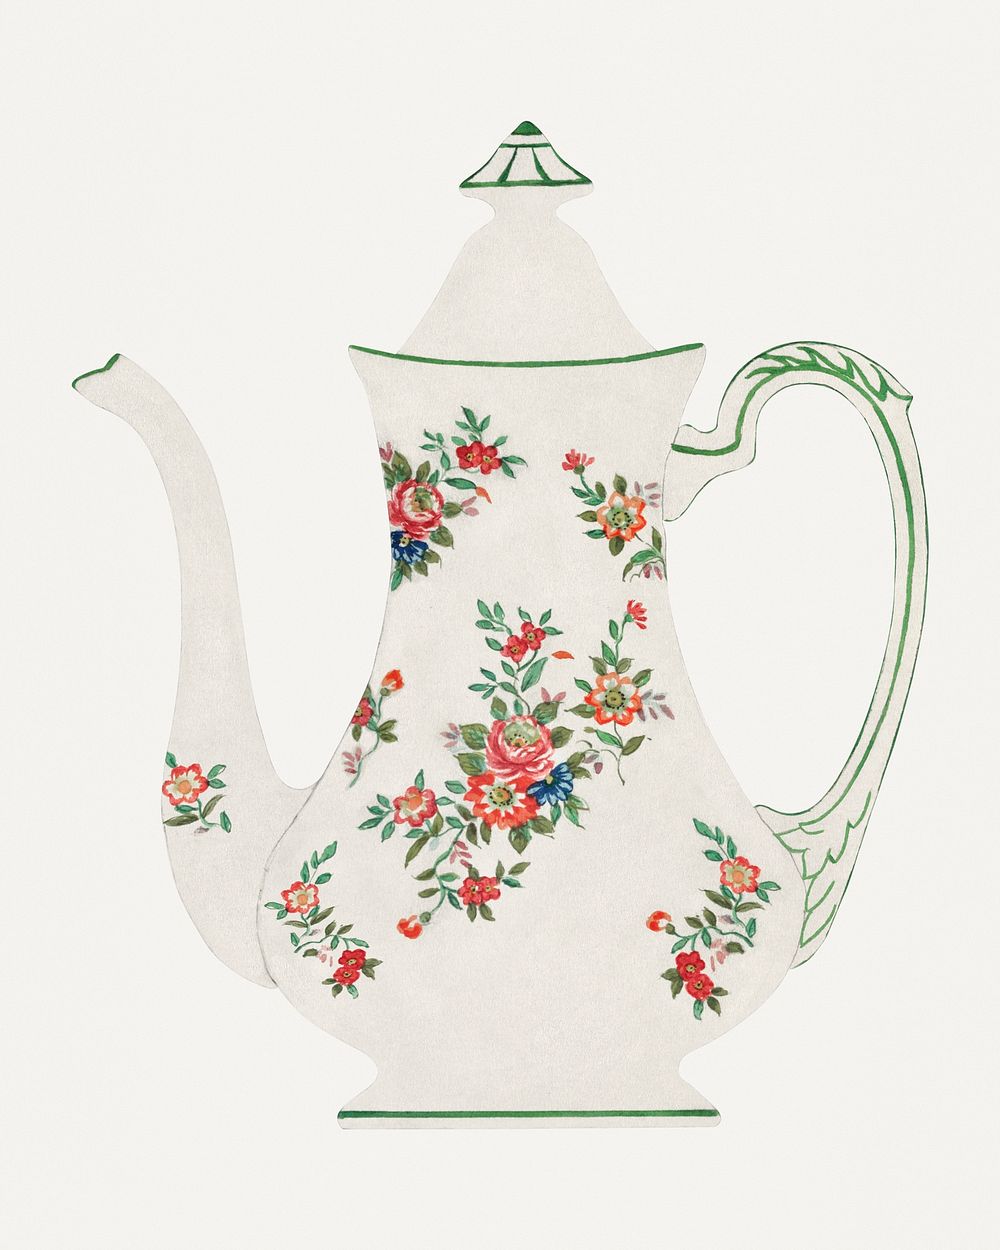 Vintage flowers and leaves teapot psd, remixed from Noritake factory china porcelain tableware design